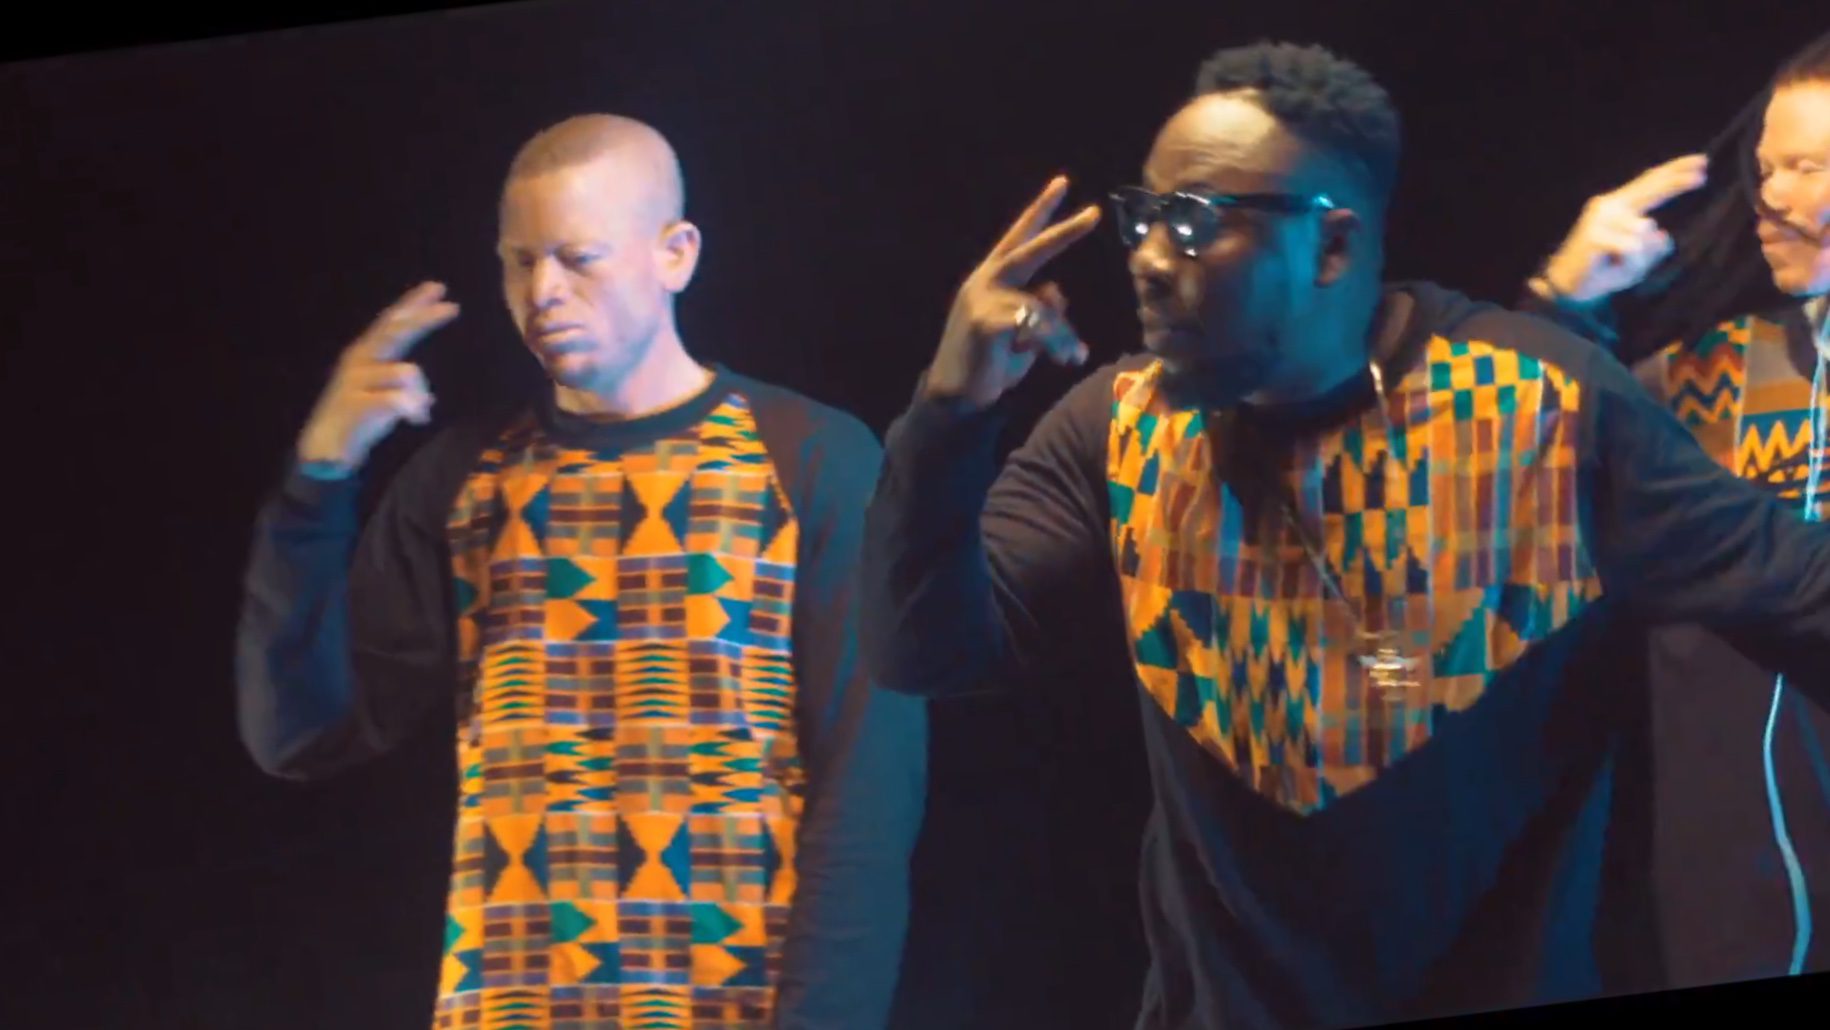 Video: Choirmaster ft Merqury Quaye & The Mason – Double up (Directed by Bra Shizzle) ‬